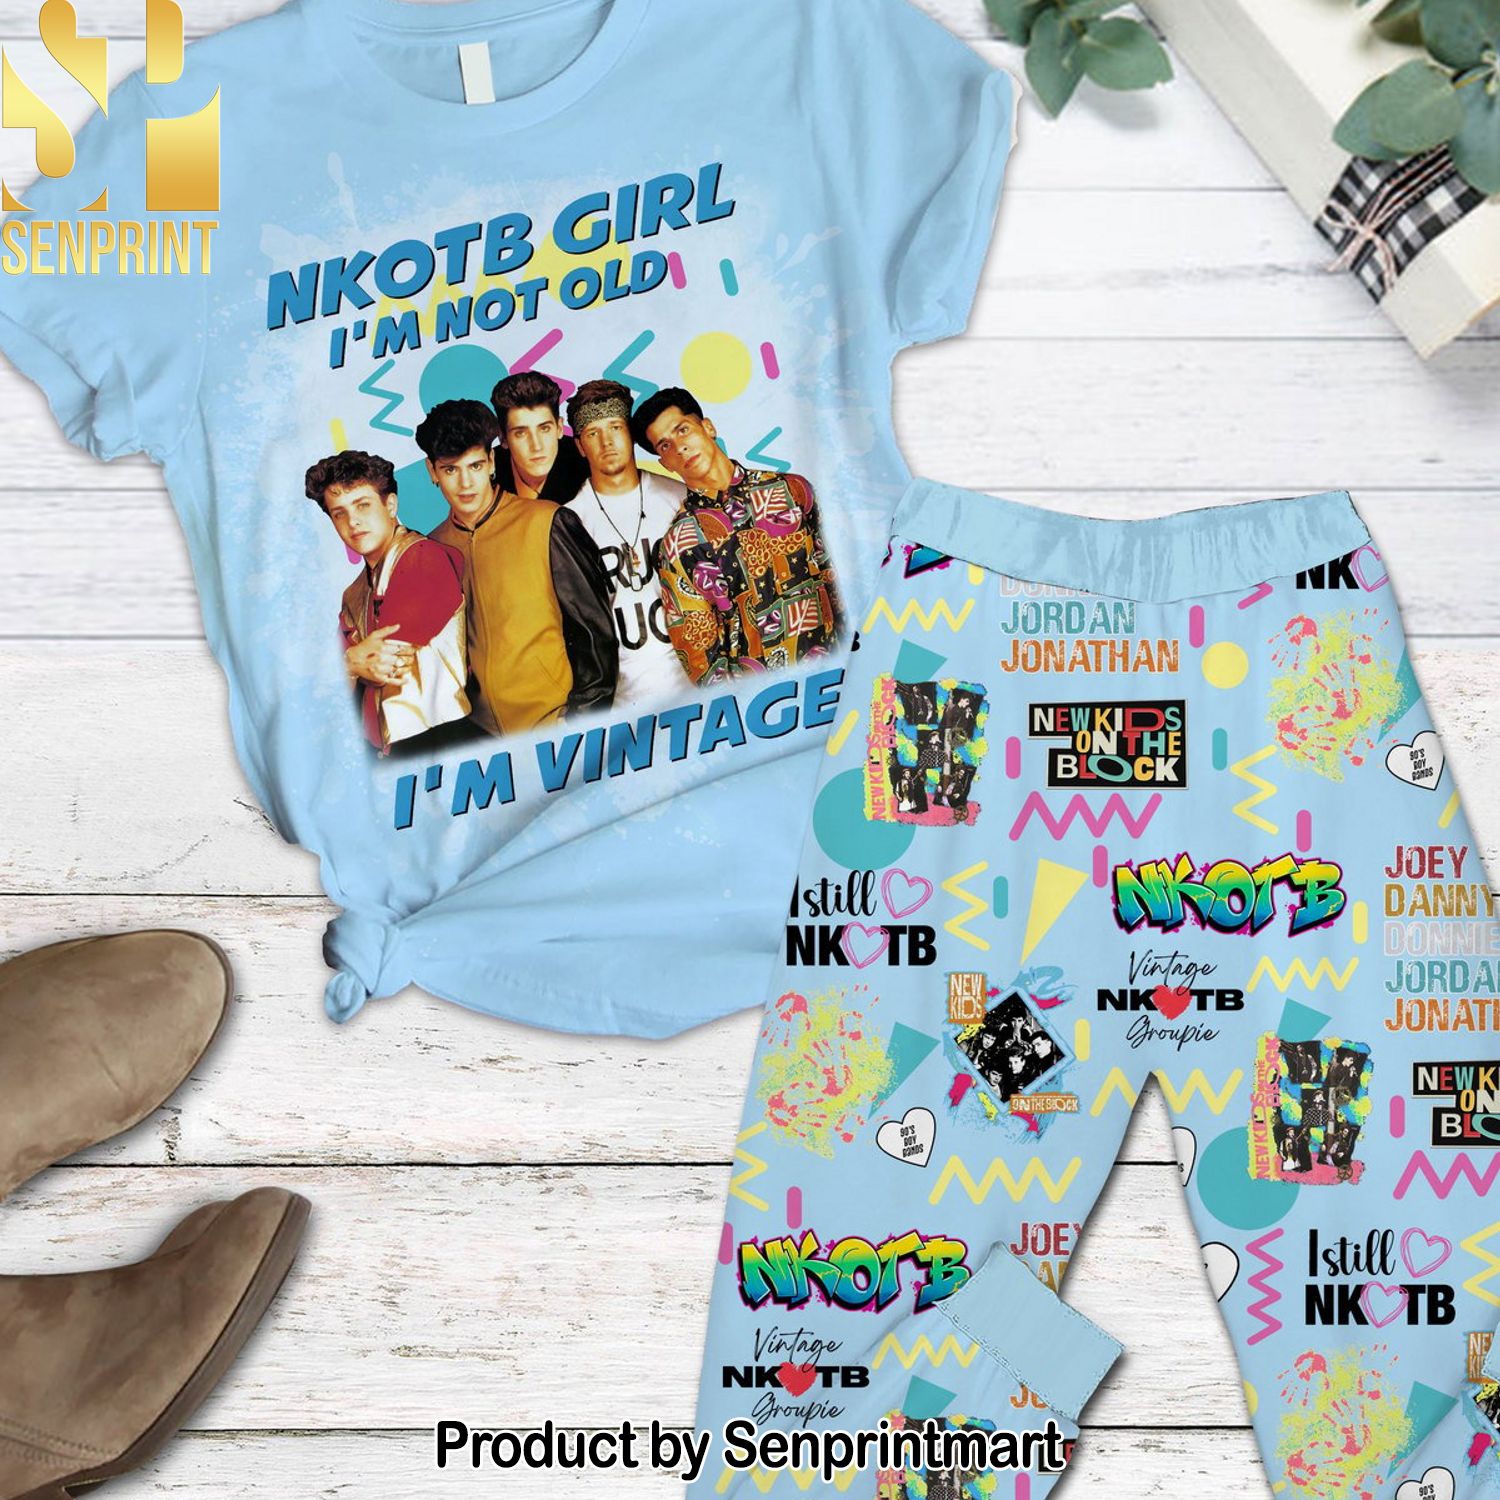 New Kids on the Block 3D Full Printed Pajama Sets